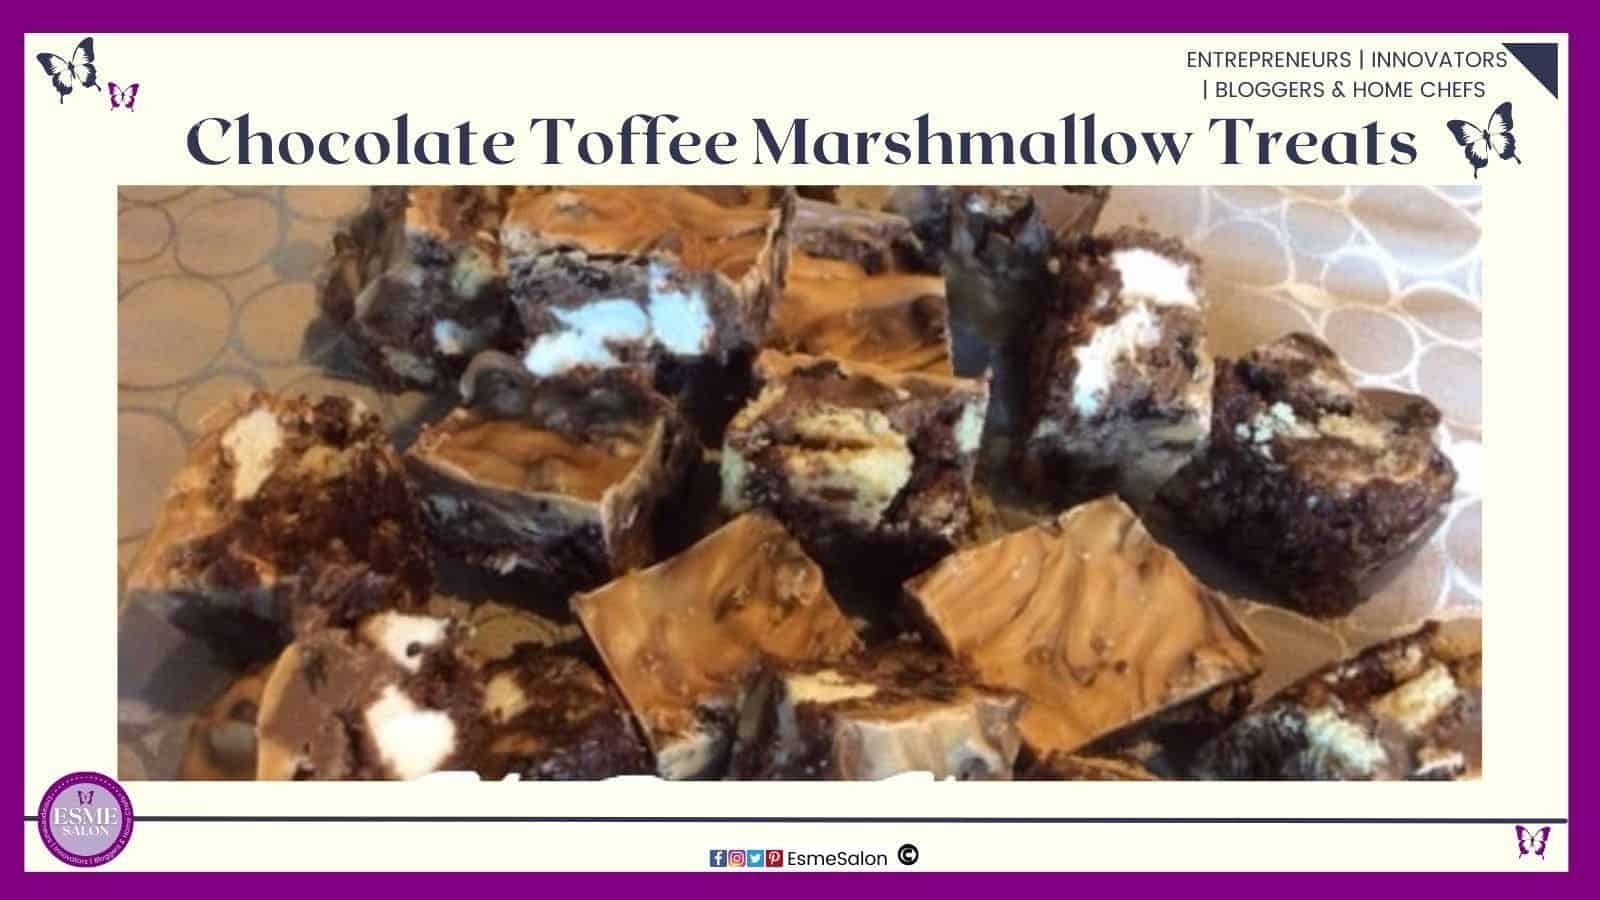 an image of a glass platter filled with Chocolate Toffee Marshmallow Treats